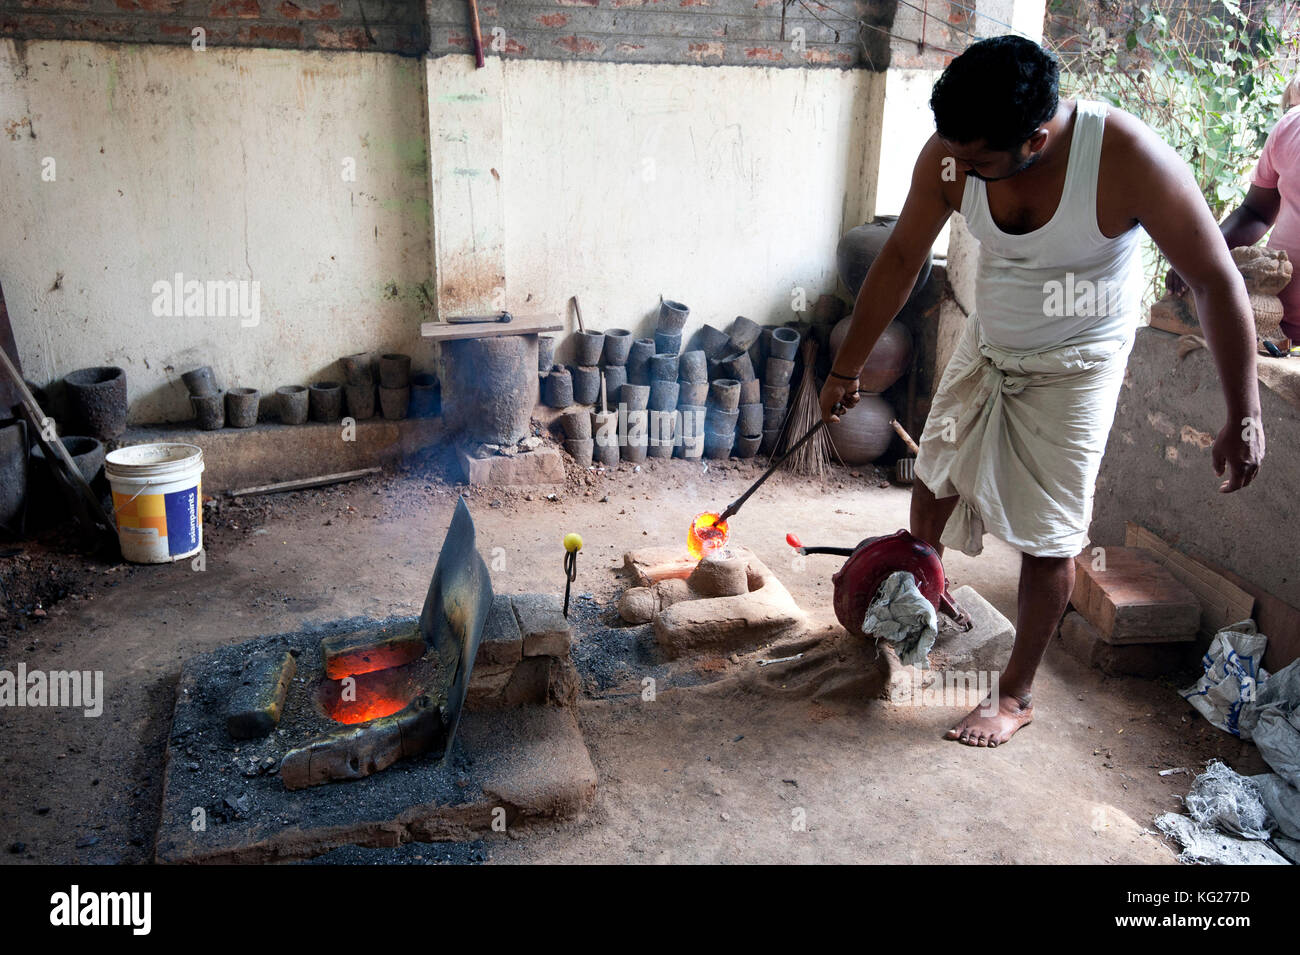 Man in white vest and dhoti, pouring molten bronze into clay mould, in Chola style lost wax bronze casting workshop, Thanjavur, Tamil Nadu, India Stock Photo